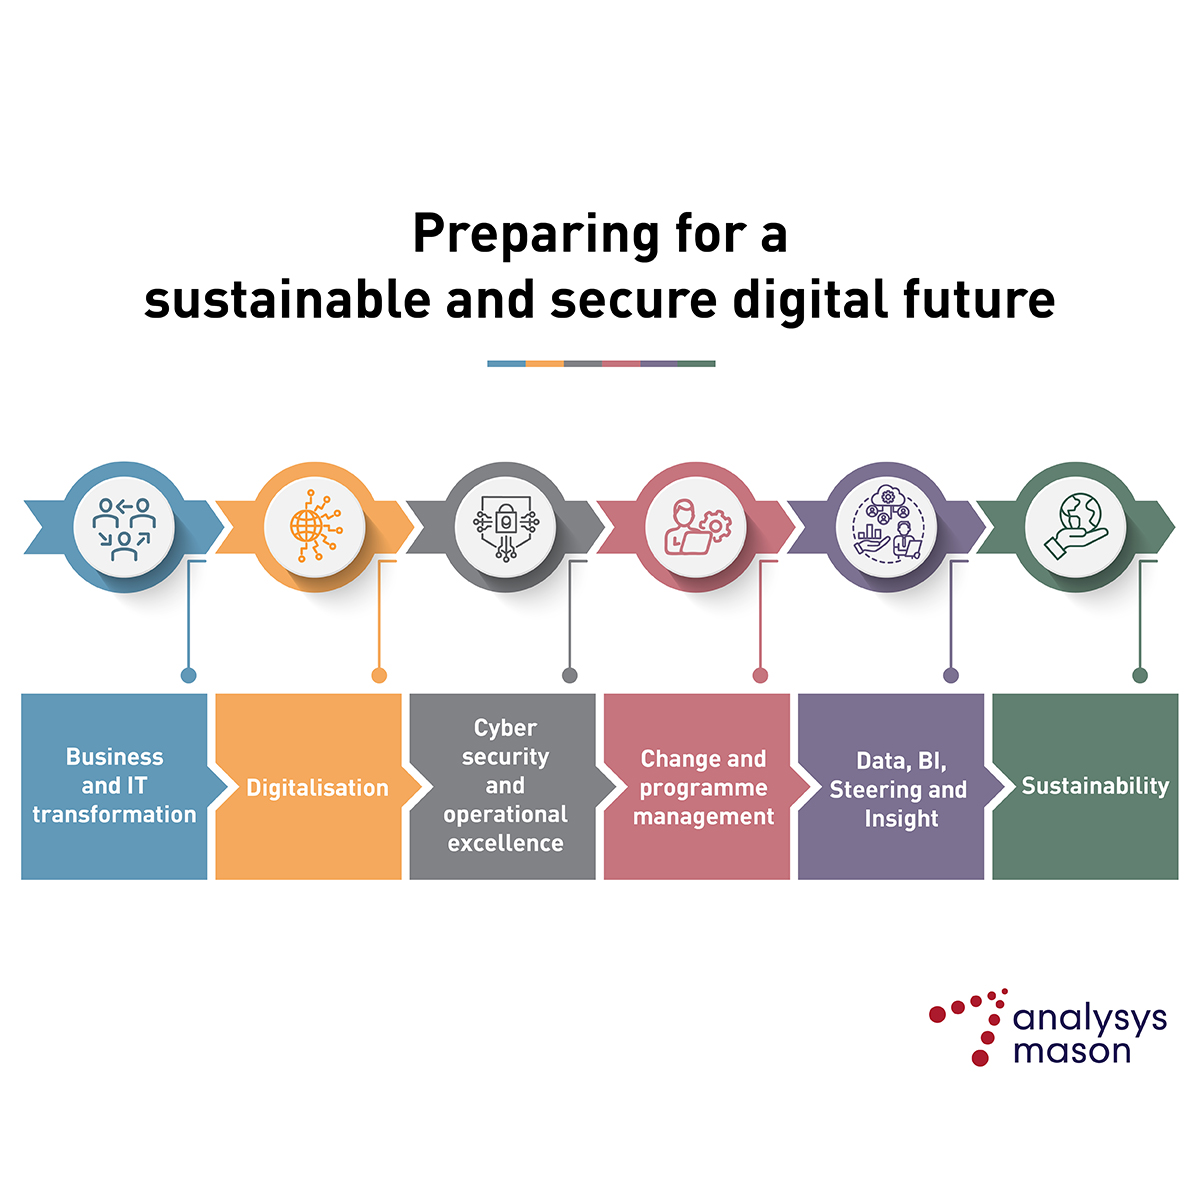 Companies, regardless of size, must gear up for a sustainable digital future, tackling legacy challenges while defining new operating models with AI integration. We help clients achieve optimal outcomes in business-critical change: bit.ly/4bfHe04